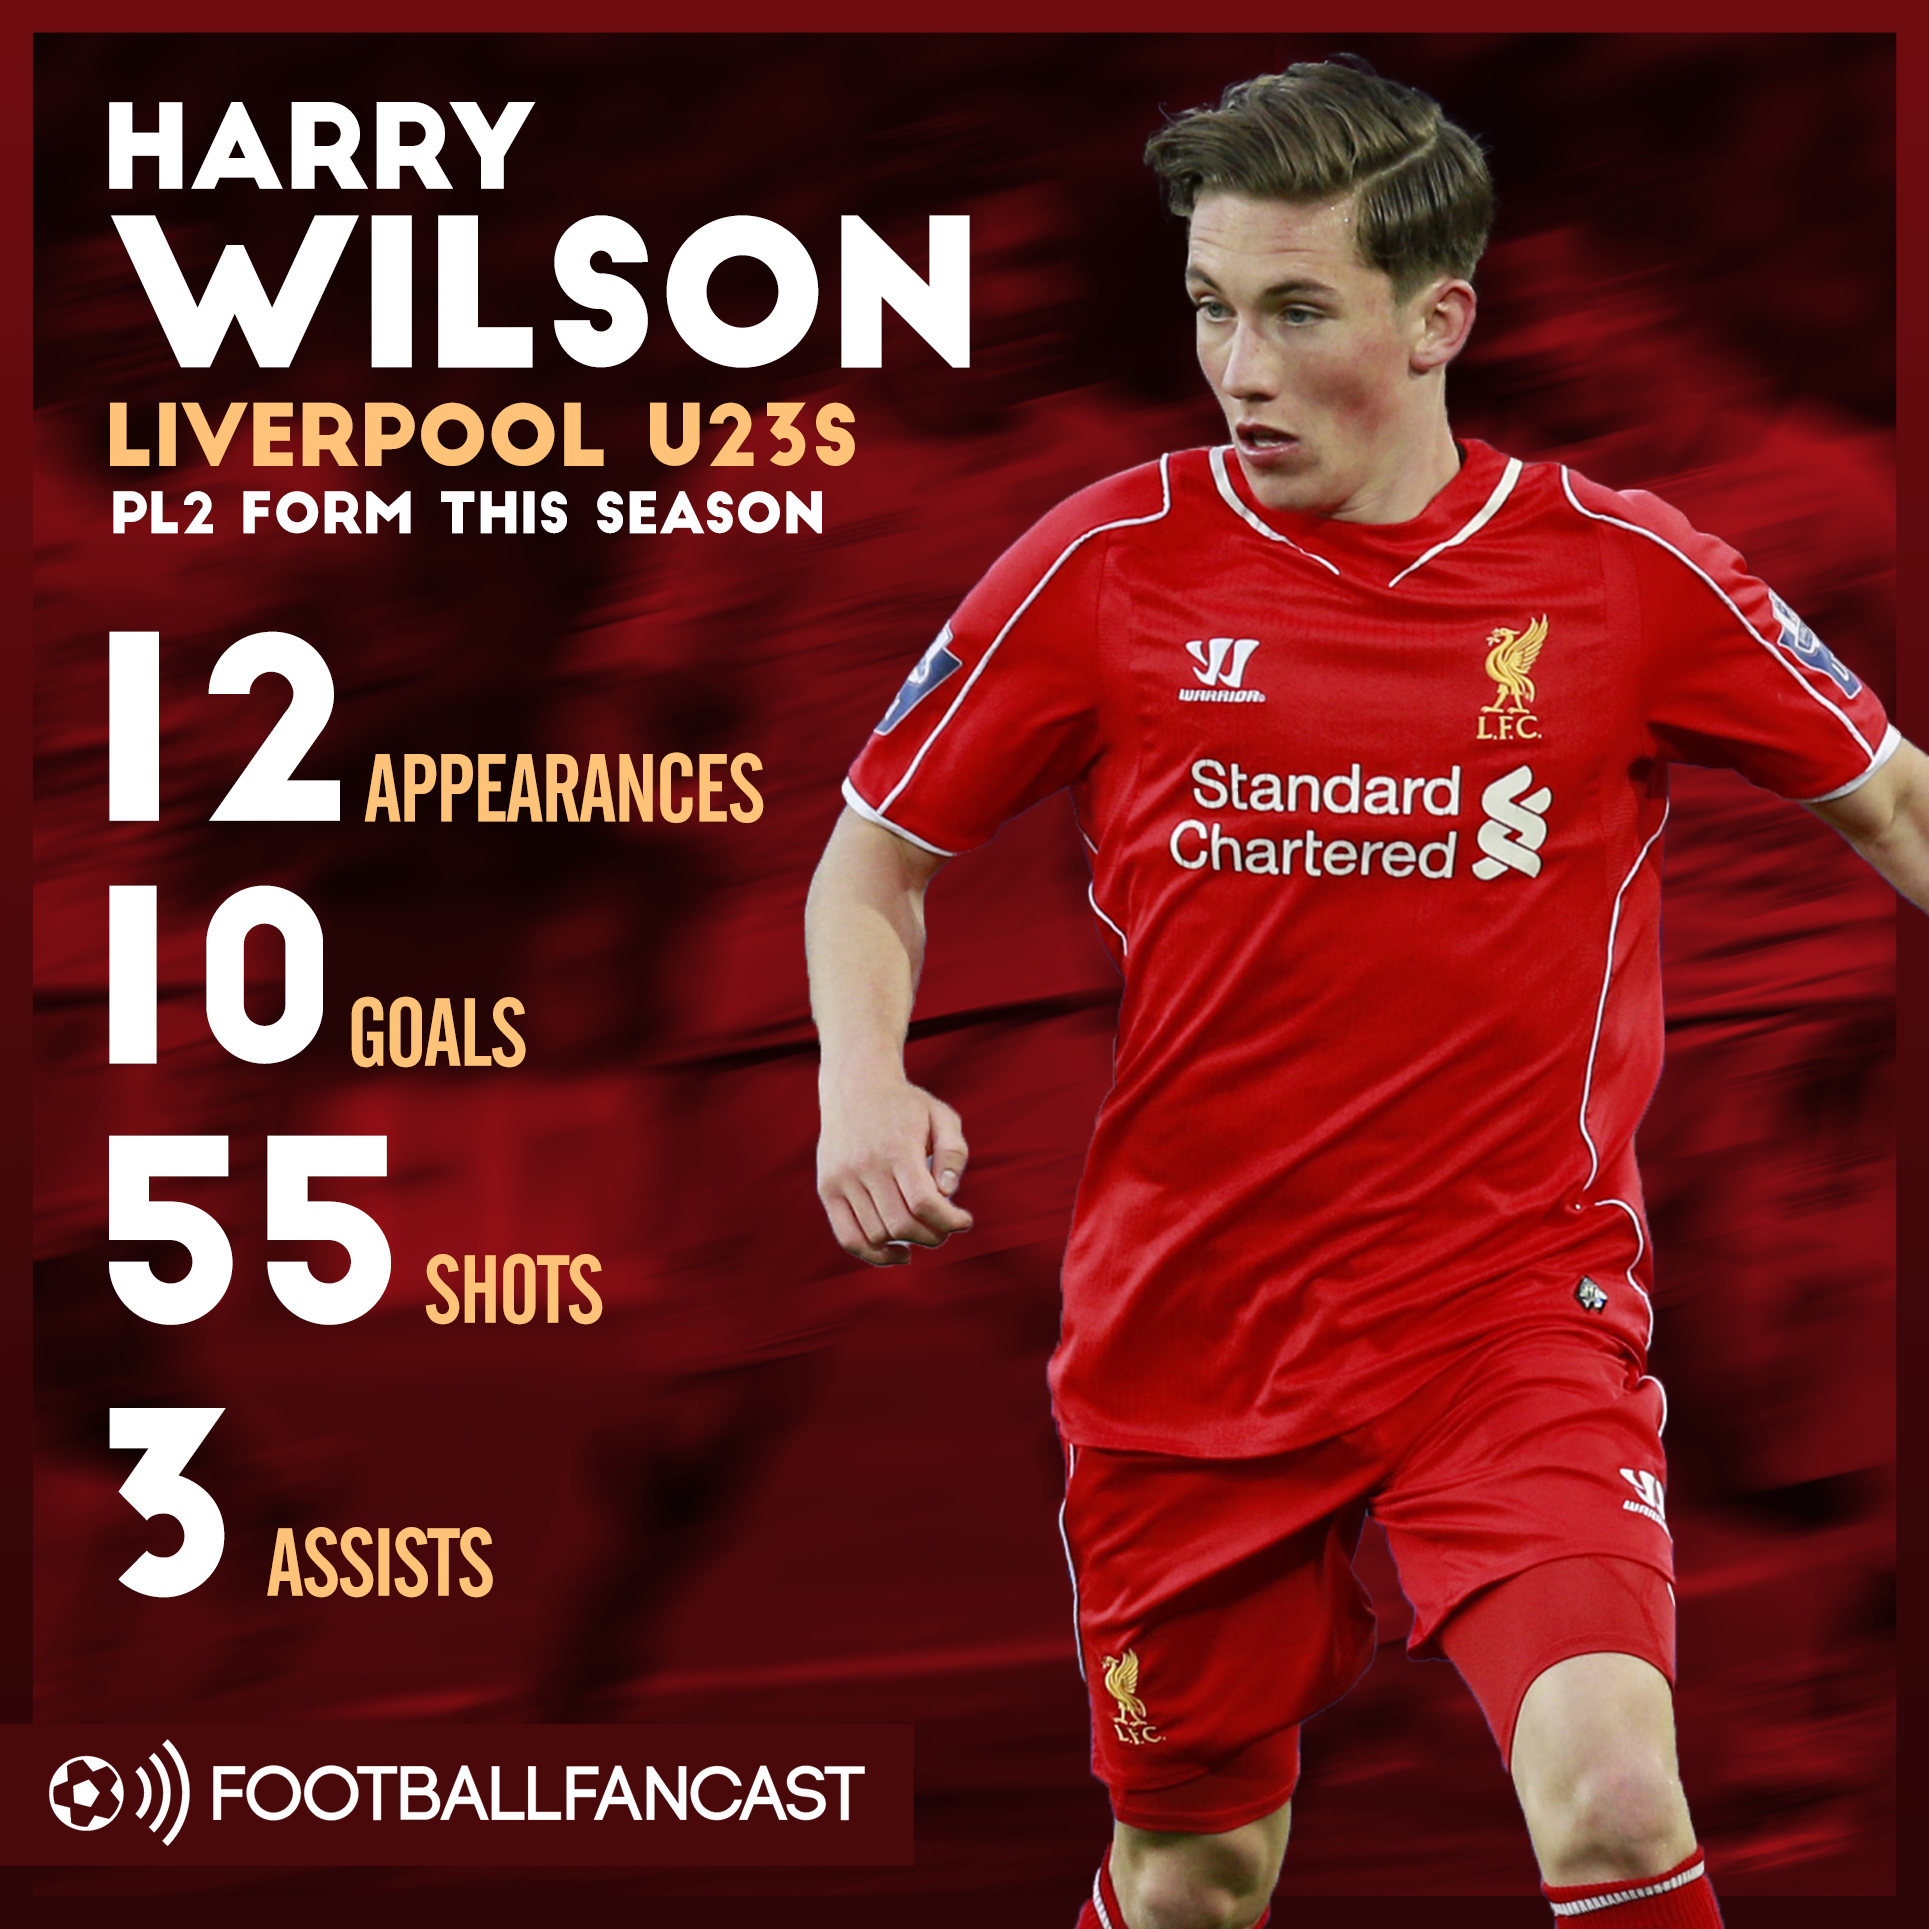 Harry Wilson's stats in PL2 this season